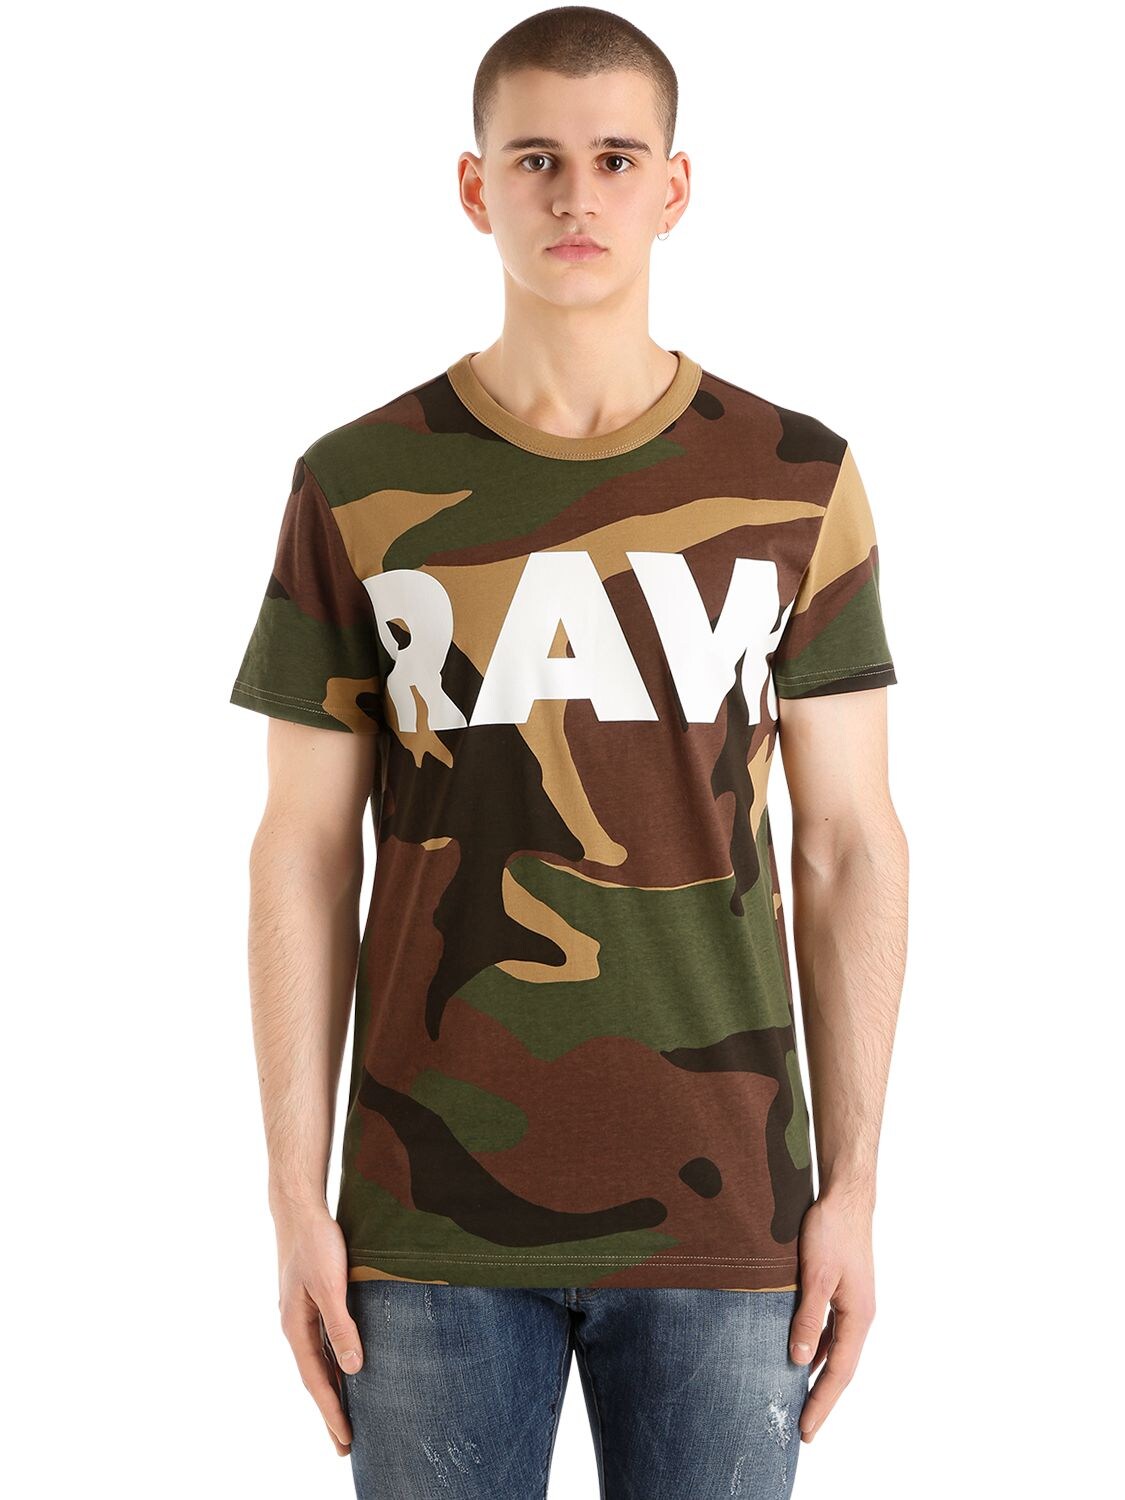 G-star By Pharrell Williams Woodland Camo Print Cotton T-shirt In Camouflage